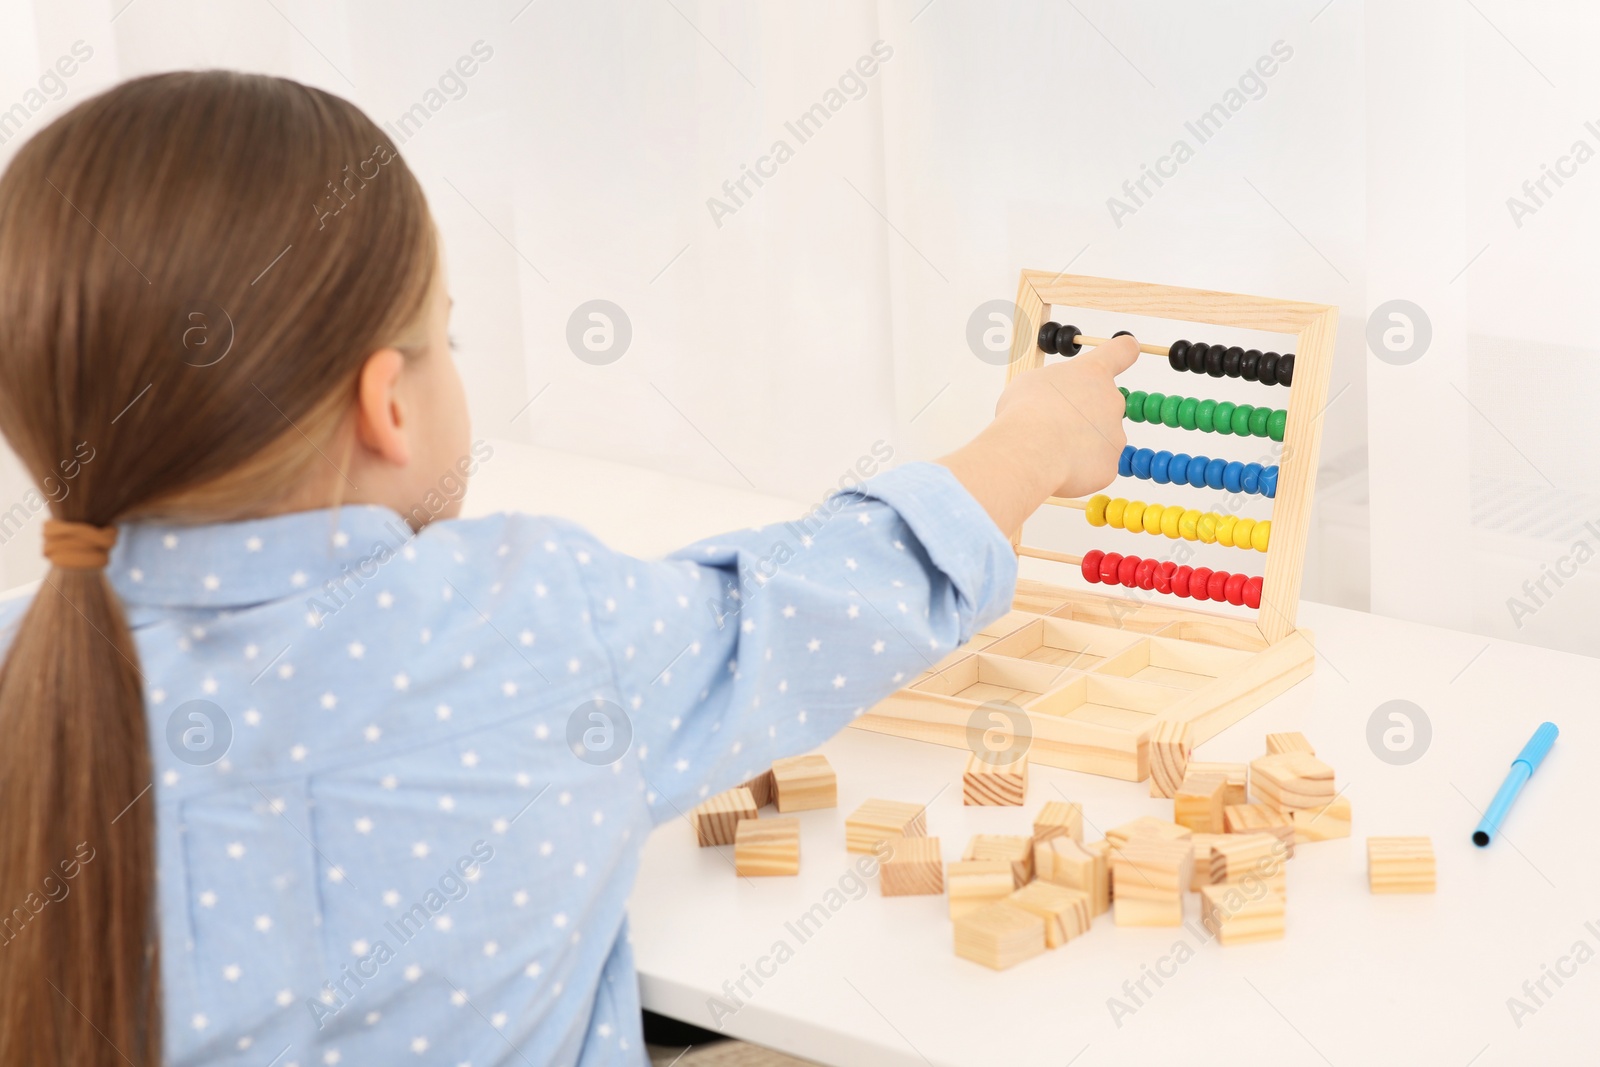 Photo of Girl playing with colorful wooden abacus at desk in room. Home workplace